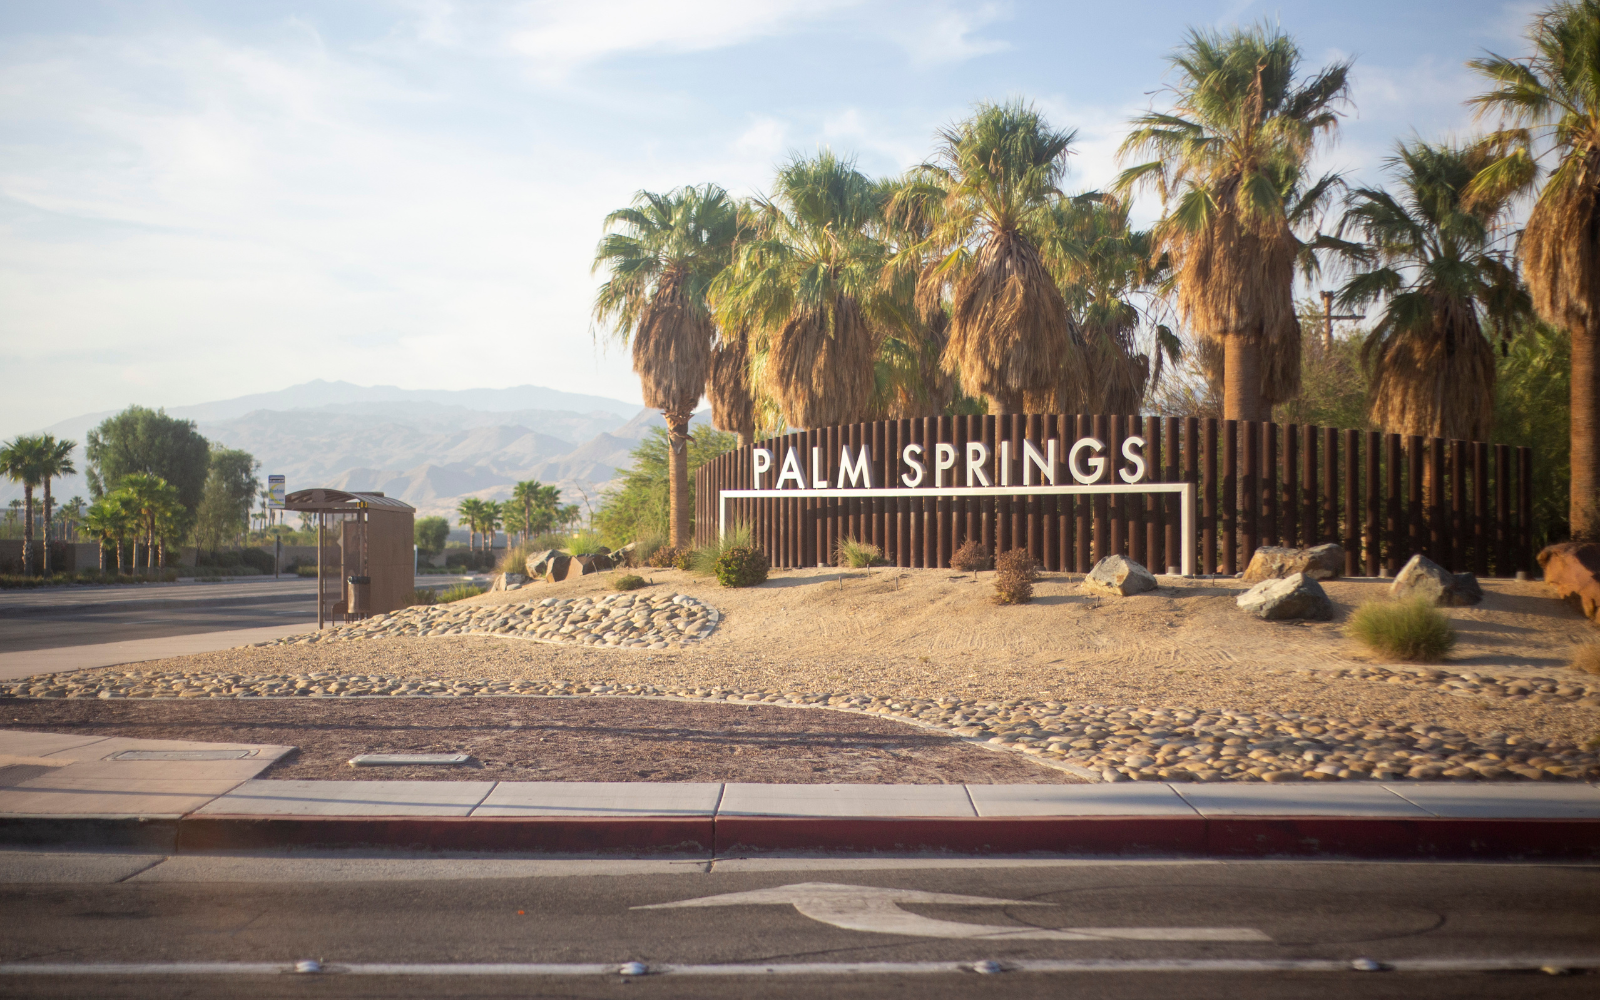 Where to Stay in Palm Springs | Best Areas & Hotels